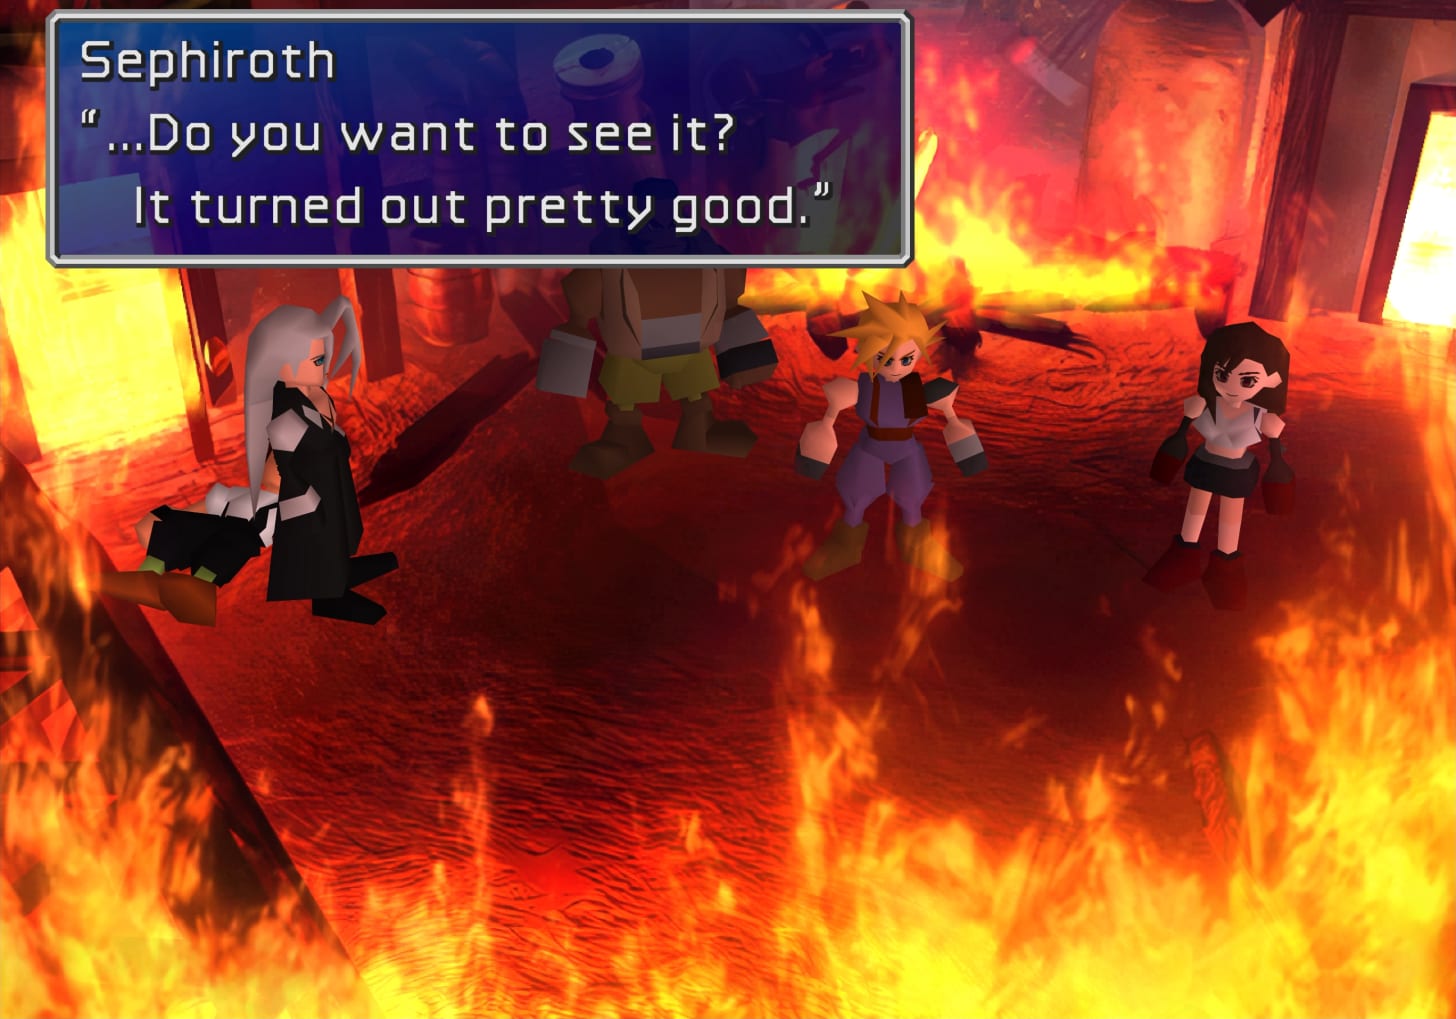 Sephiroth: "...Do you want to see it? It turned out pretty good."